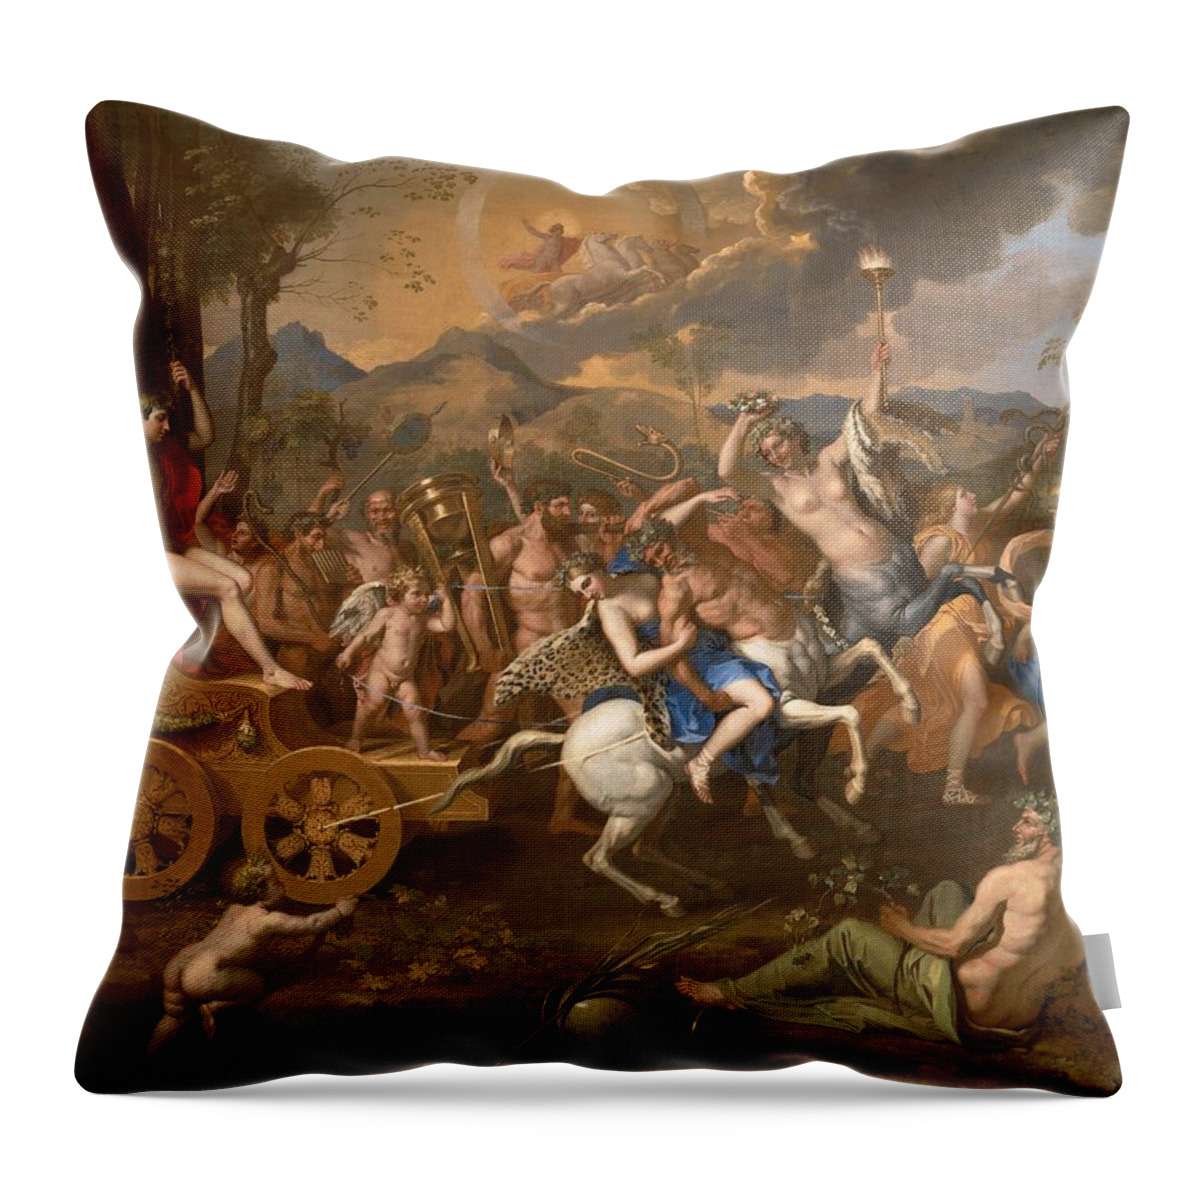 Triumph Throw Pillow featuring the painting The Triumph of Bacchus #6 by Nicolas Poussin